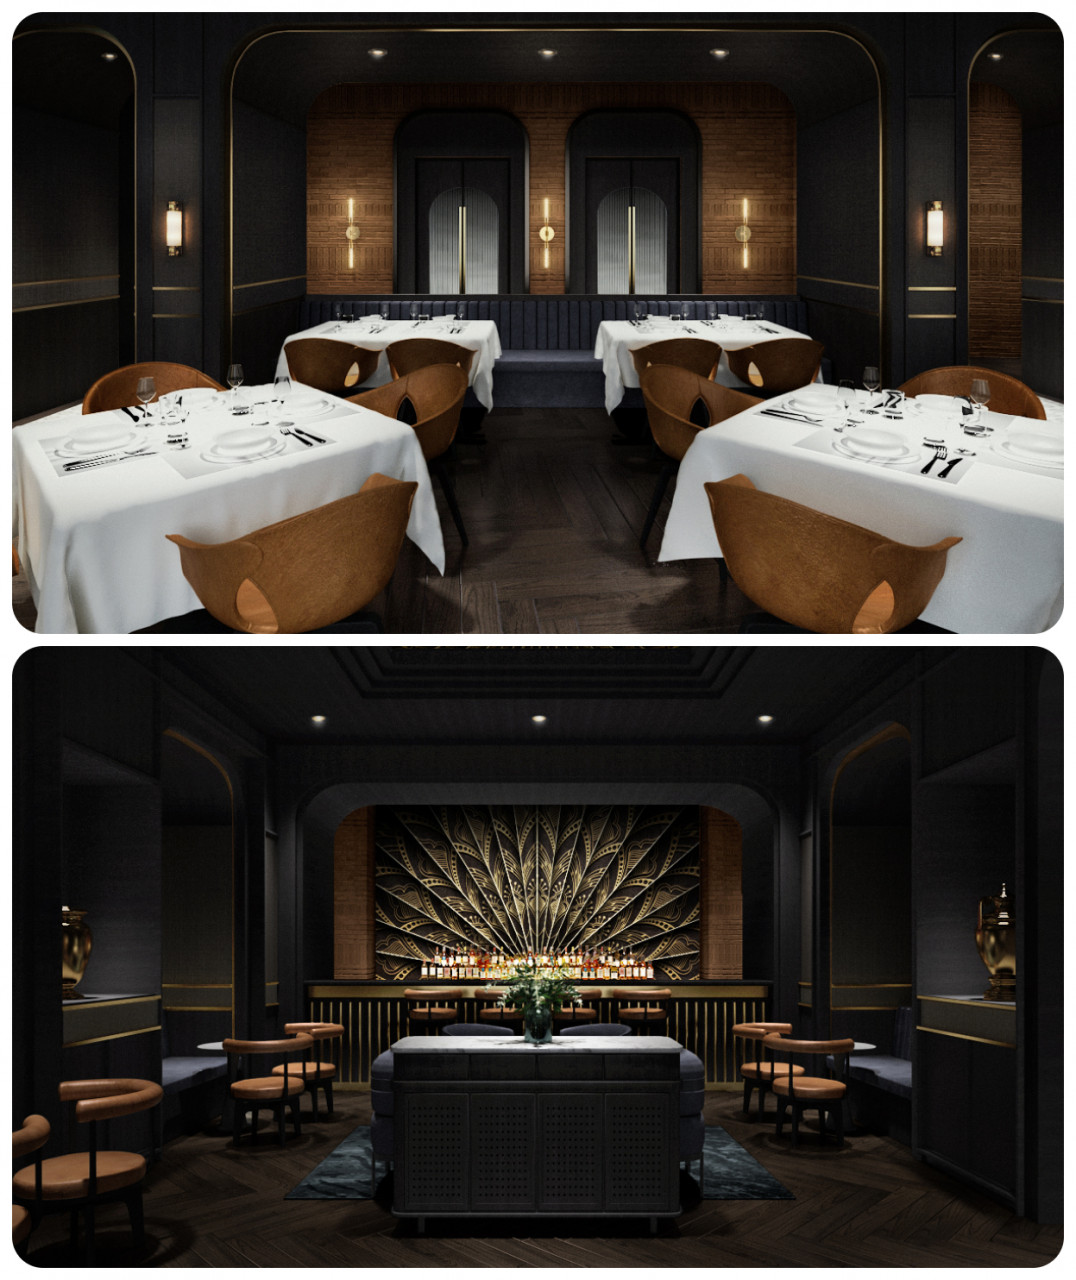 There will also be two private dining rooms for up to 22 guests, as well as a dedicated bar and lounge serving crafted cocktails with seats for up to 30 people. – Pic courtesy of Nadodi